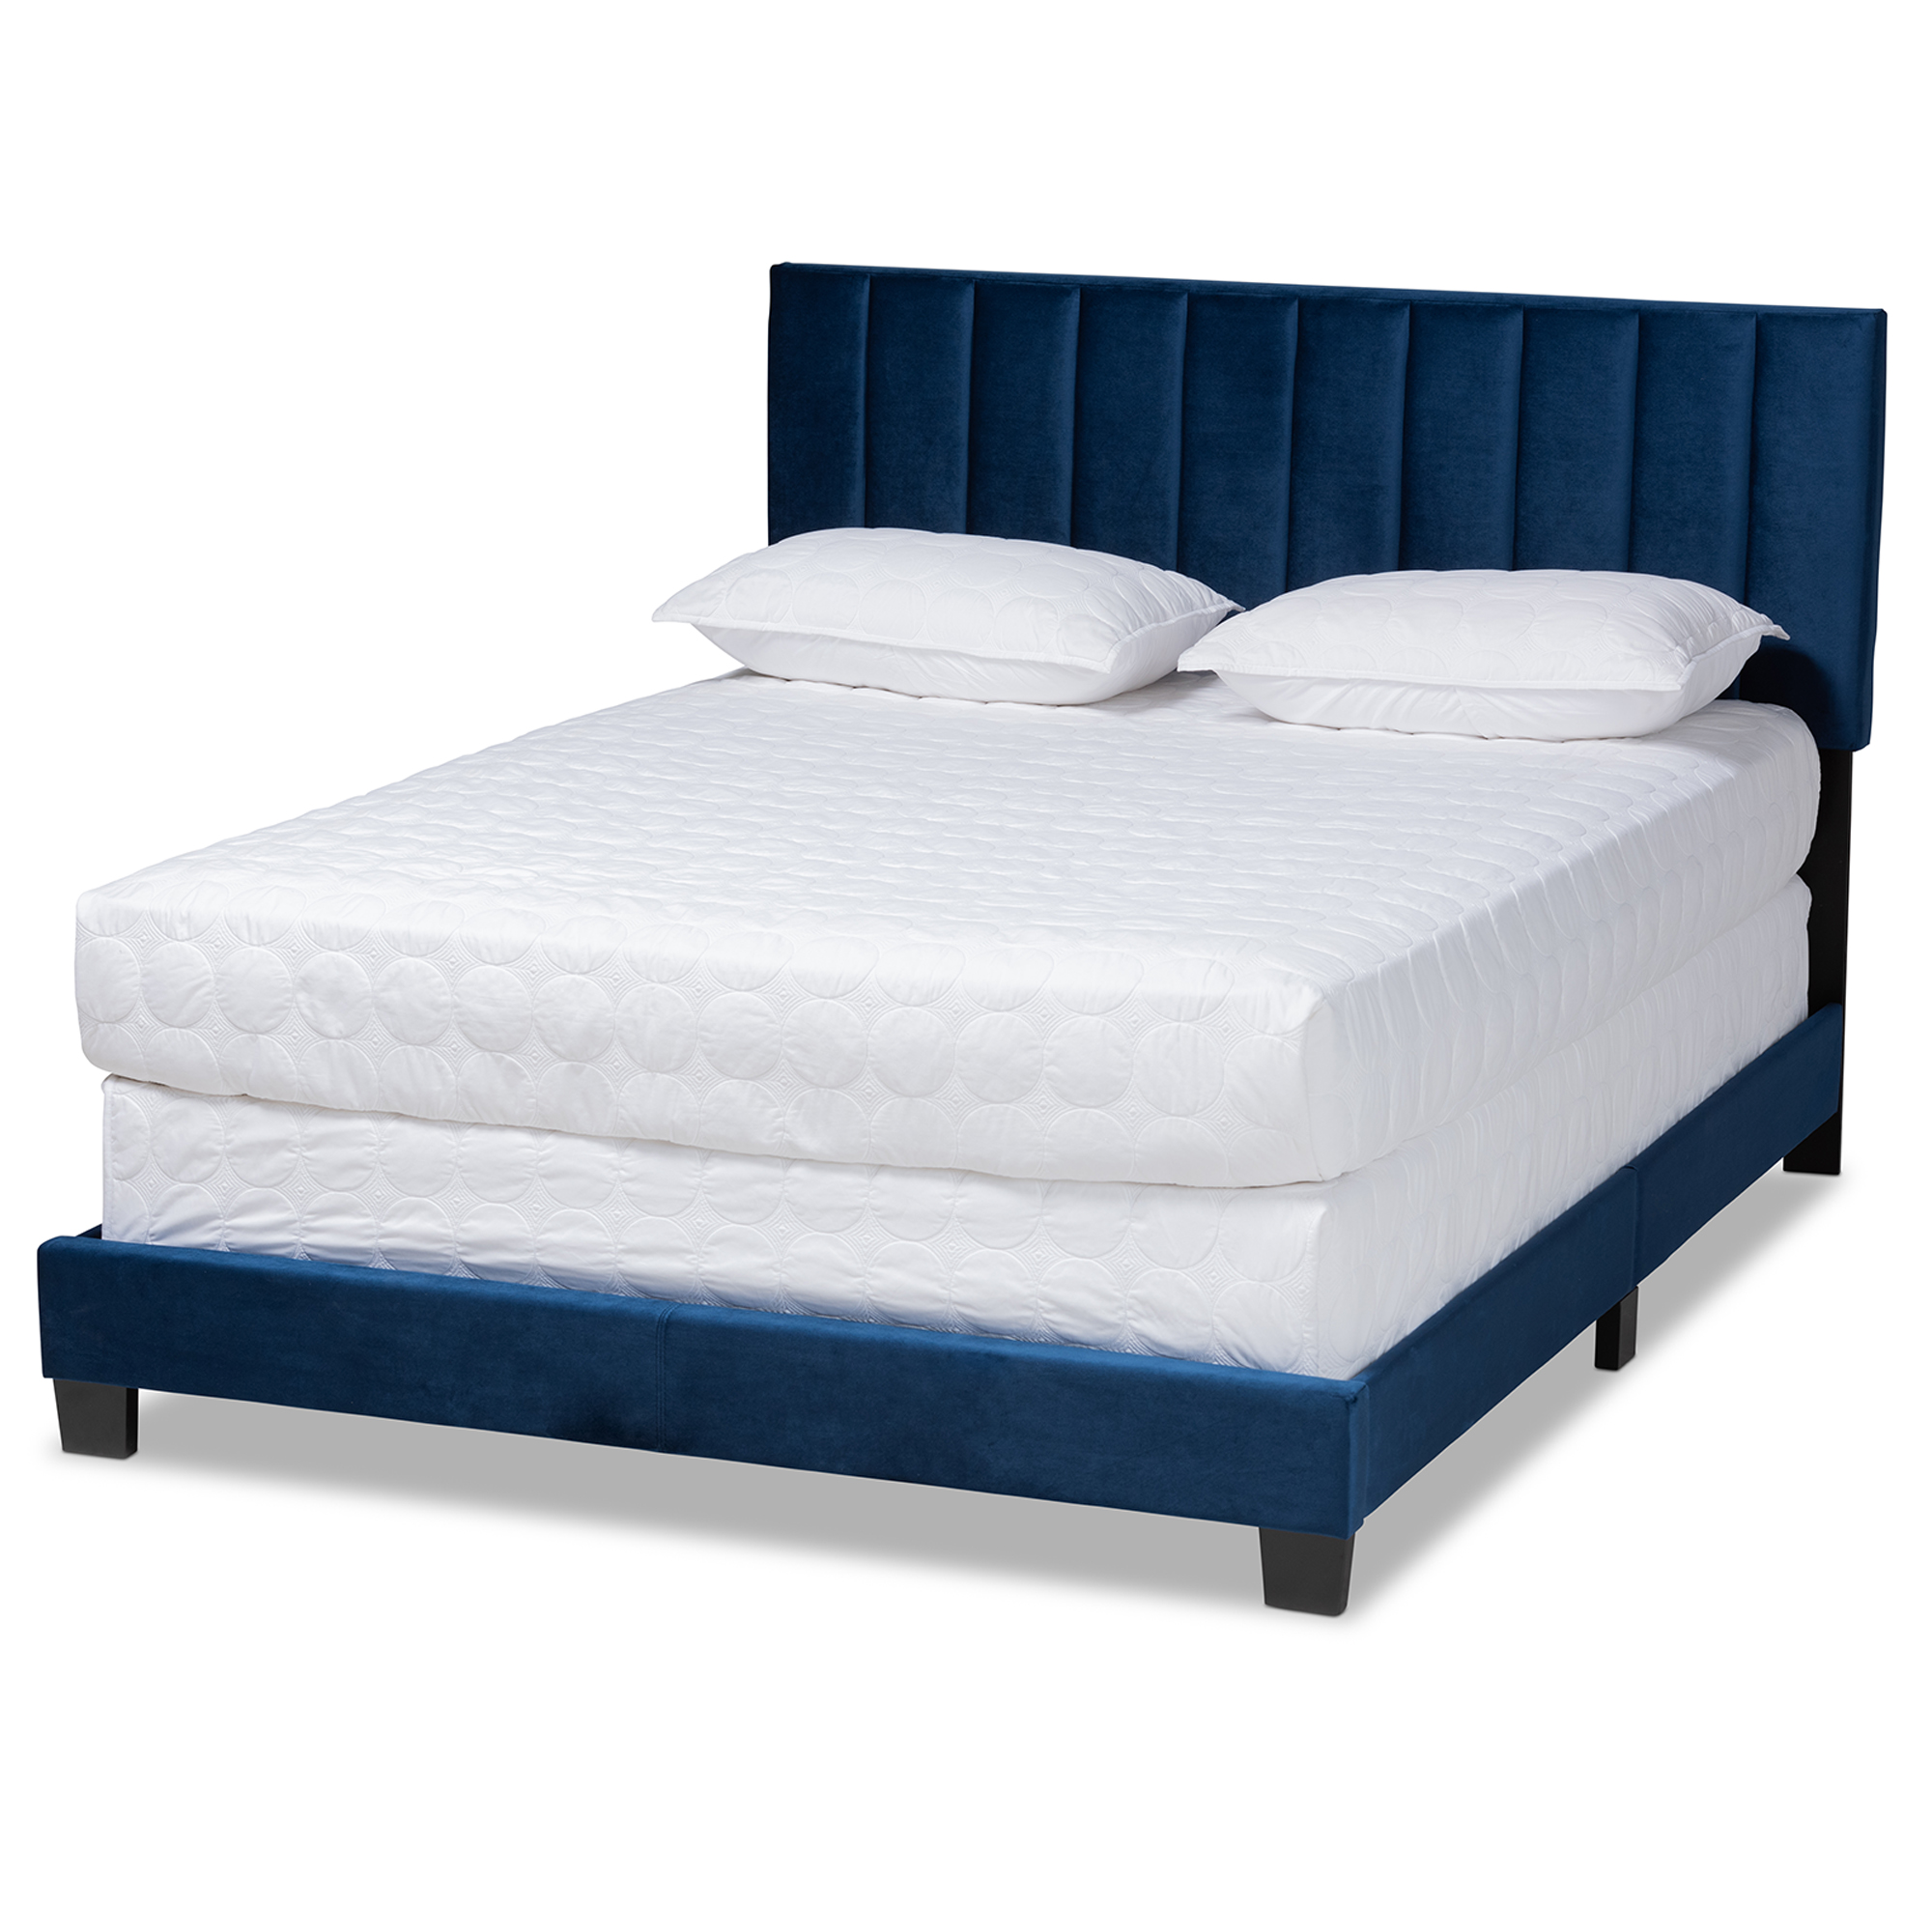 Baxton Studio Clare Glam And Luxe Navy, King Size Panel Bed Frame